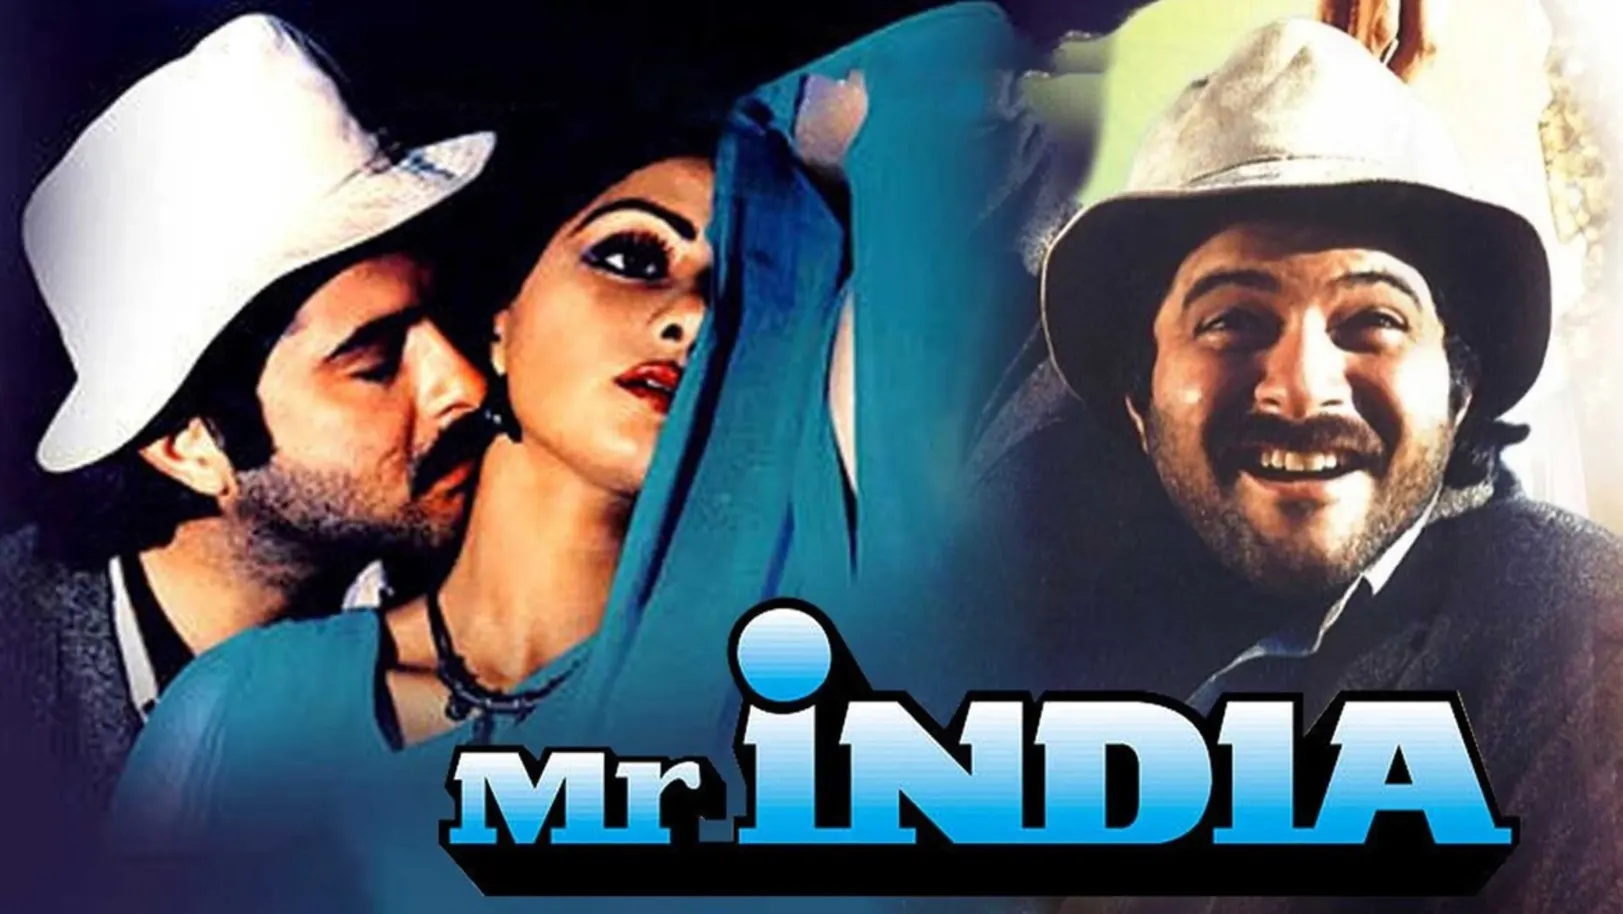 Mr. India Streaming Now On Zee Bollywood